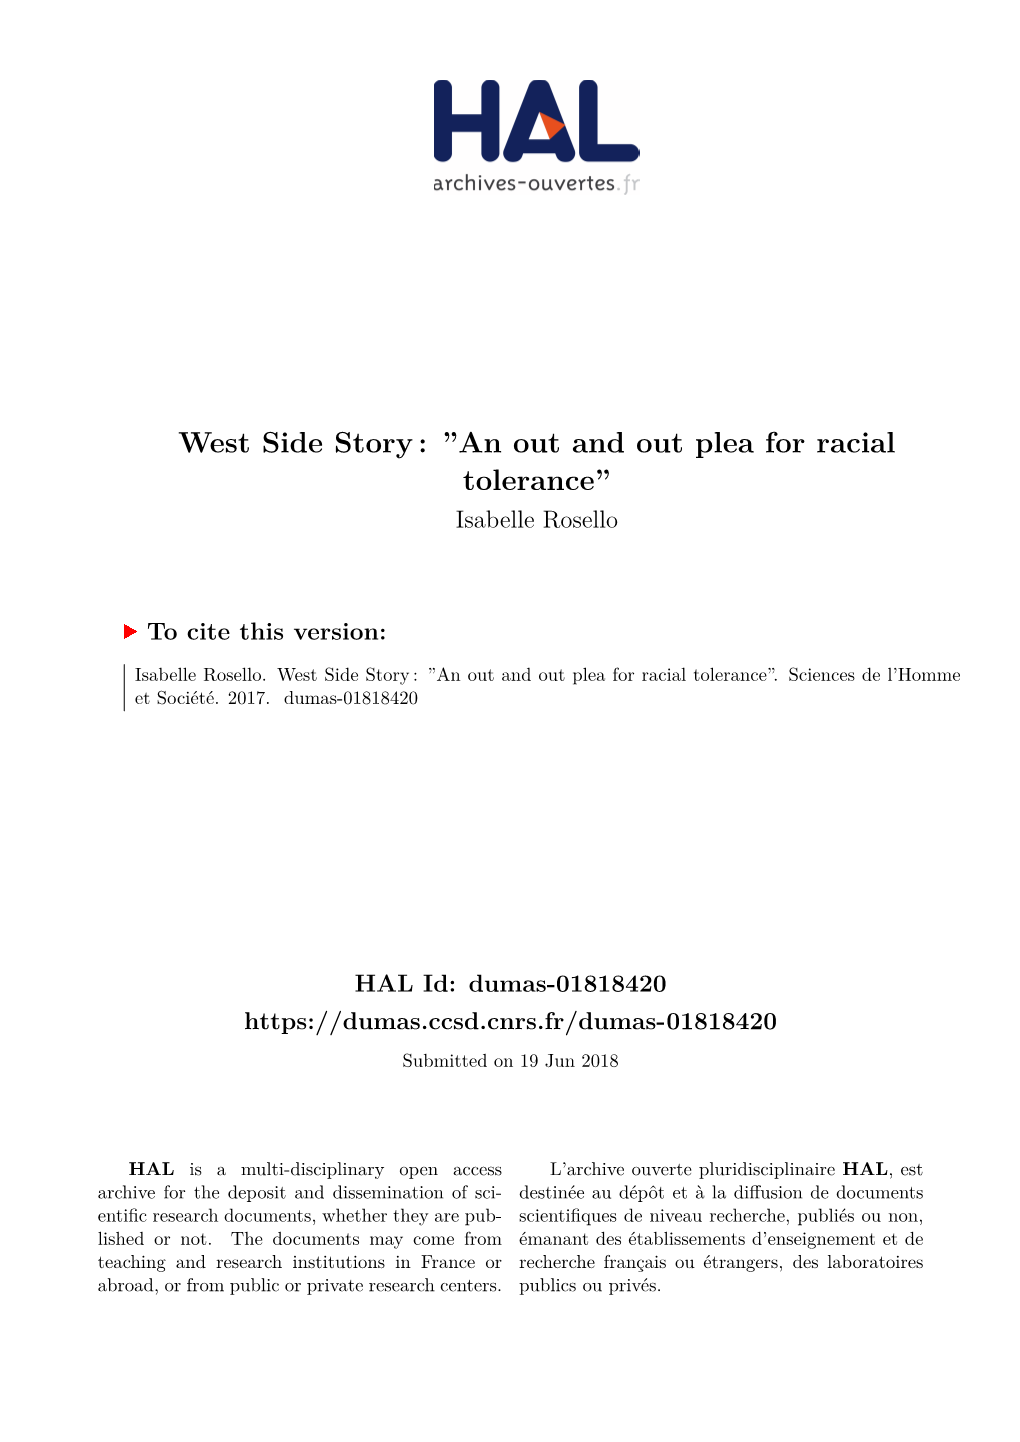 West Side Story: ''An out and out Plea for Racial Tolerance''